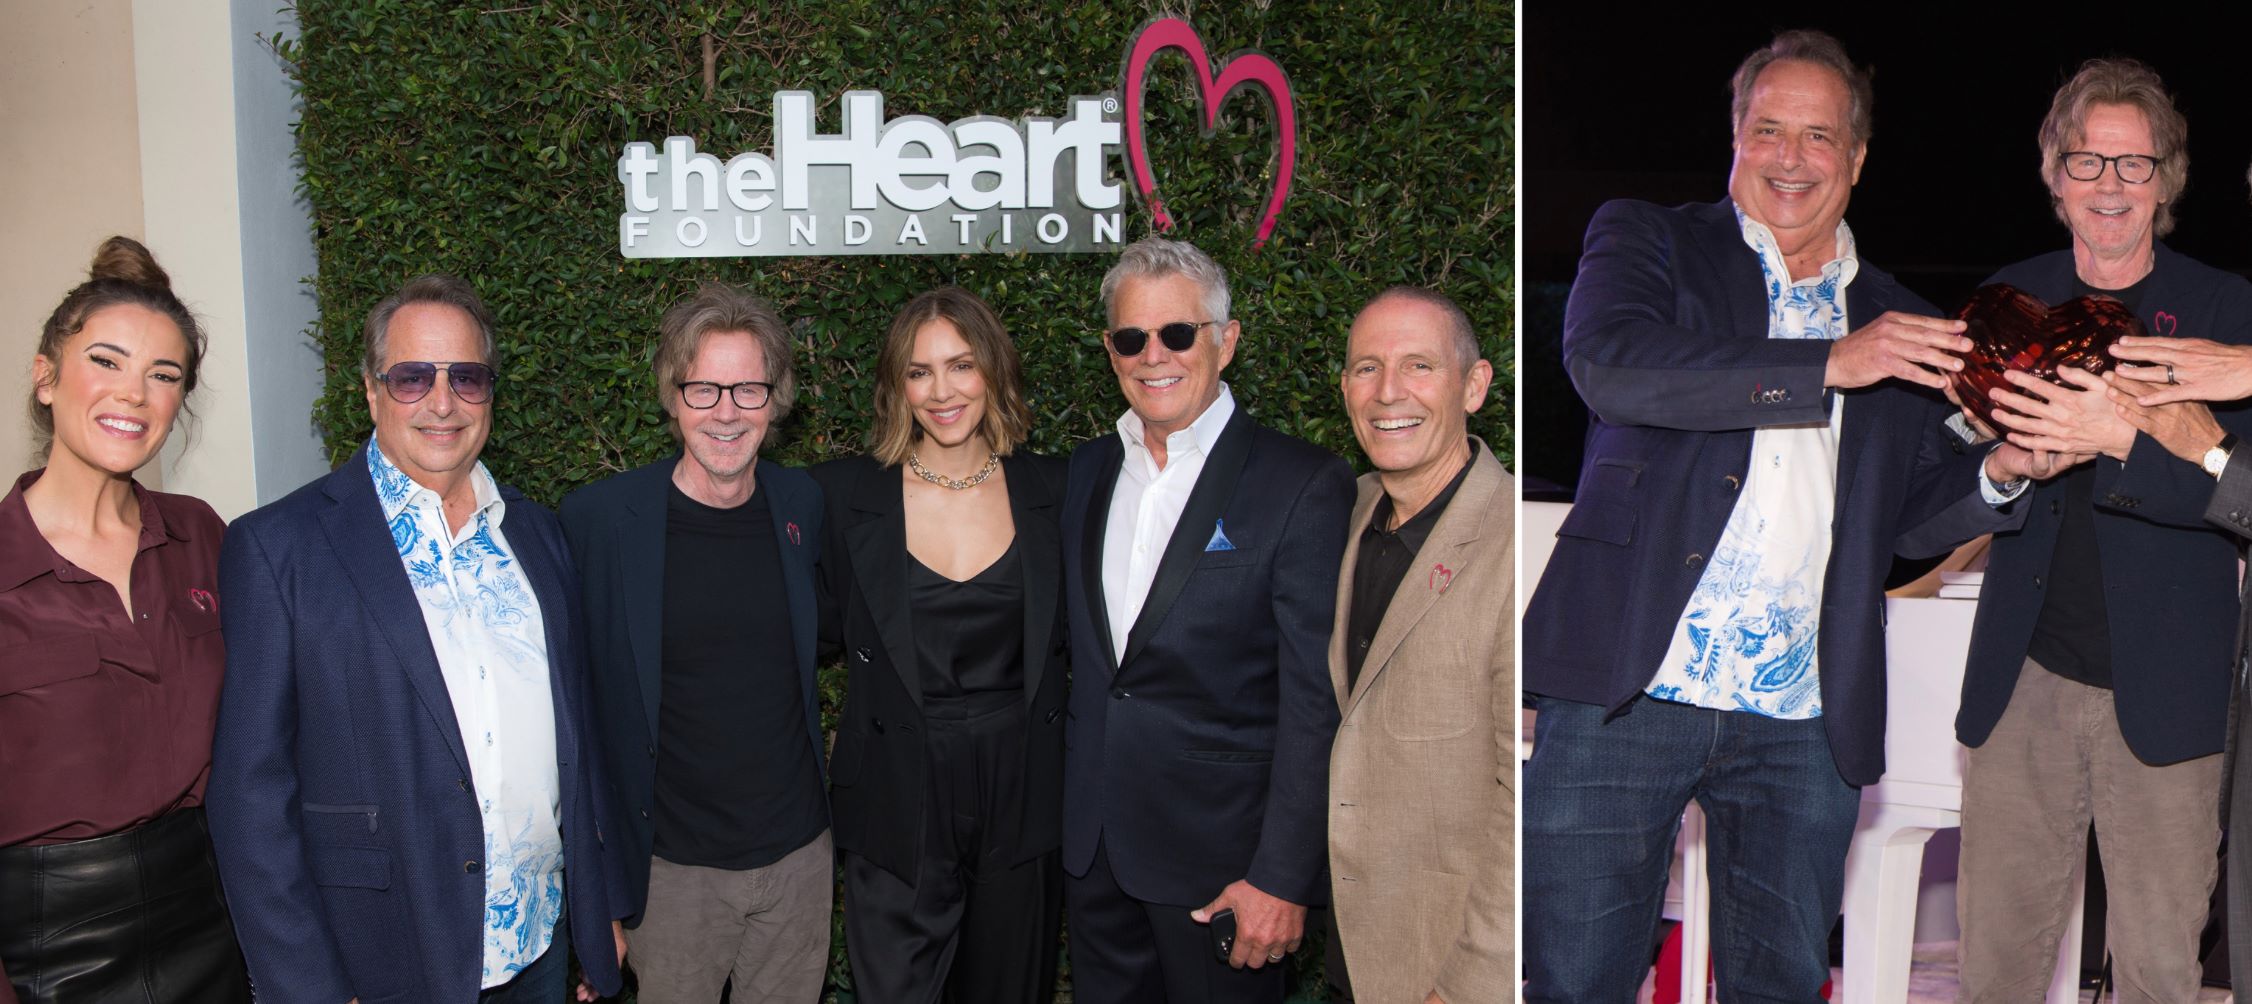 An Evening Close to the Heart: The Heart Foundation Honors Dana Carvey with Katharine McPhee Foster, David Foster, and More!